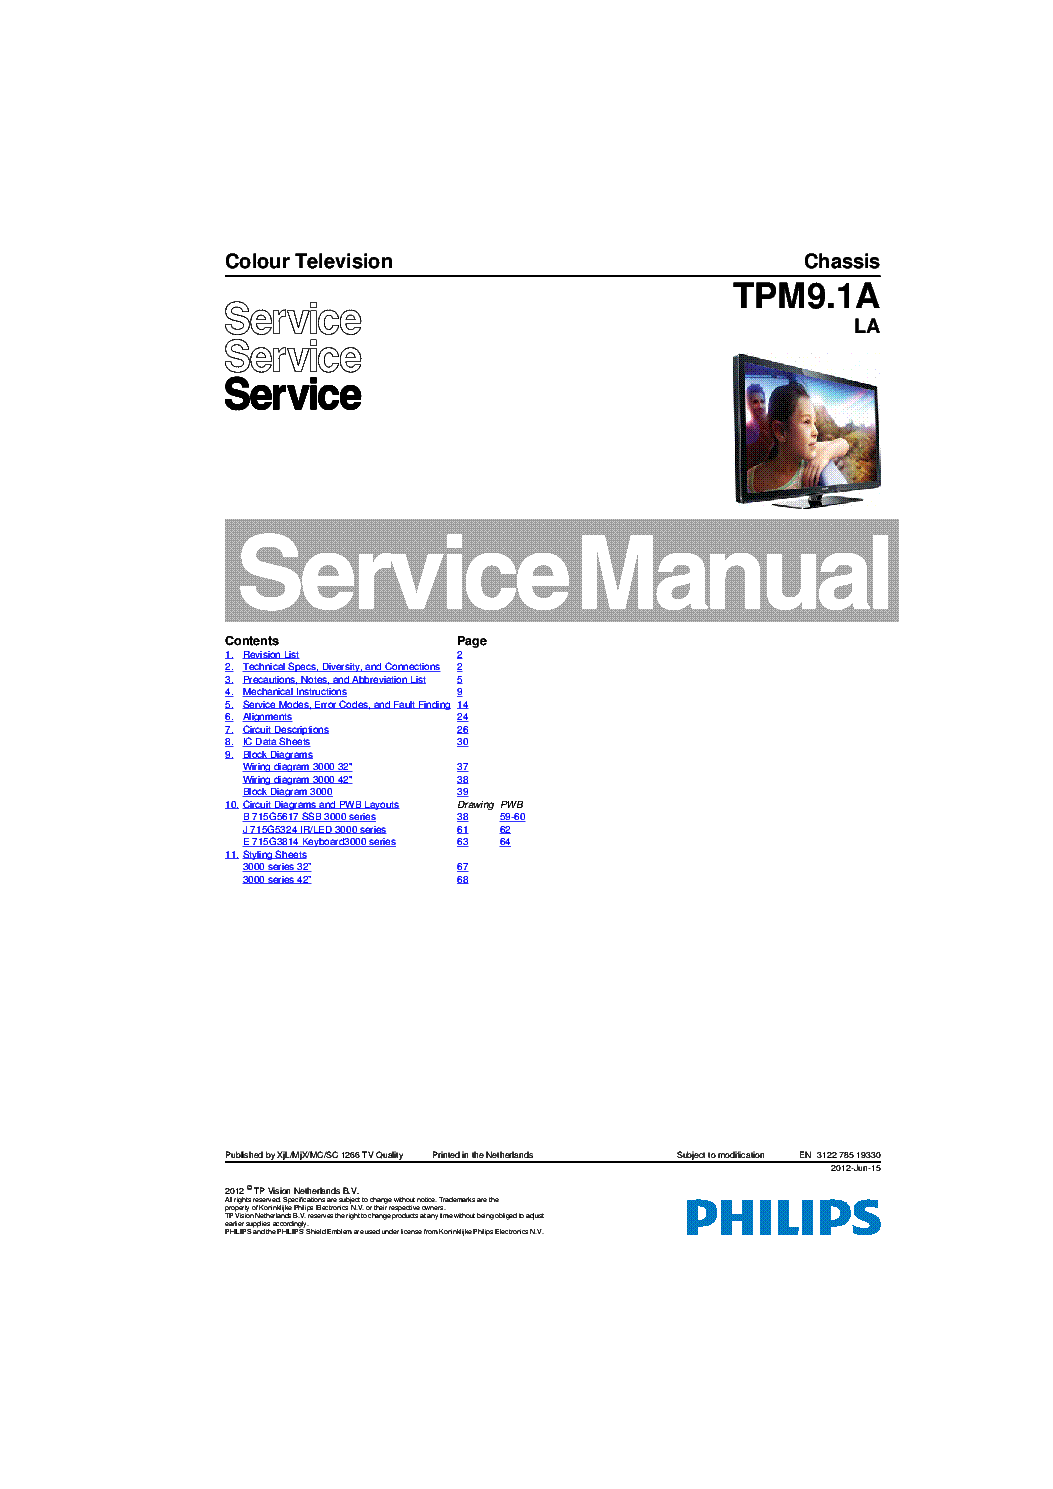 PHILIPS 32PFL3007 56 CHASSIS TPM9.1ALA service manual (1st page)